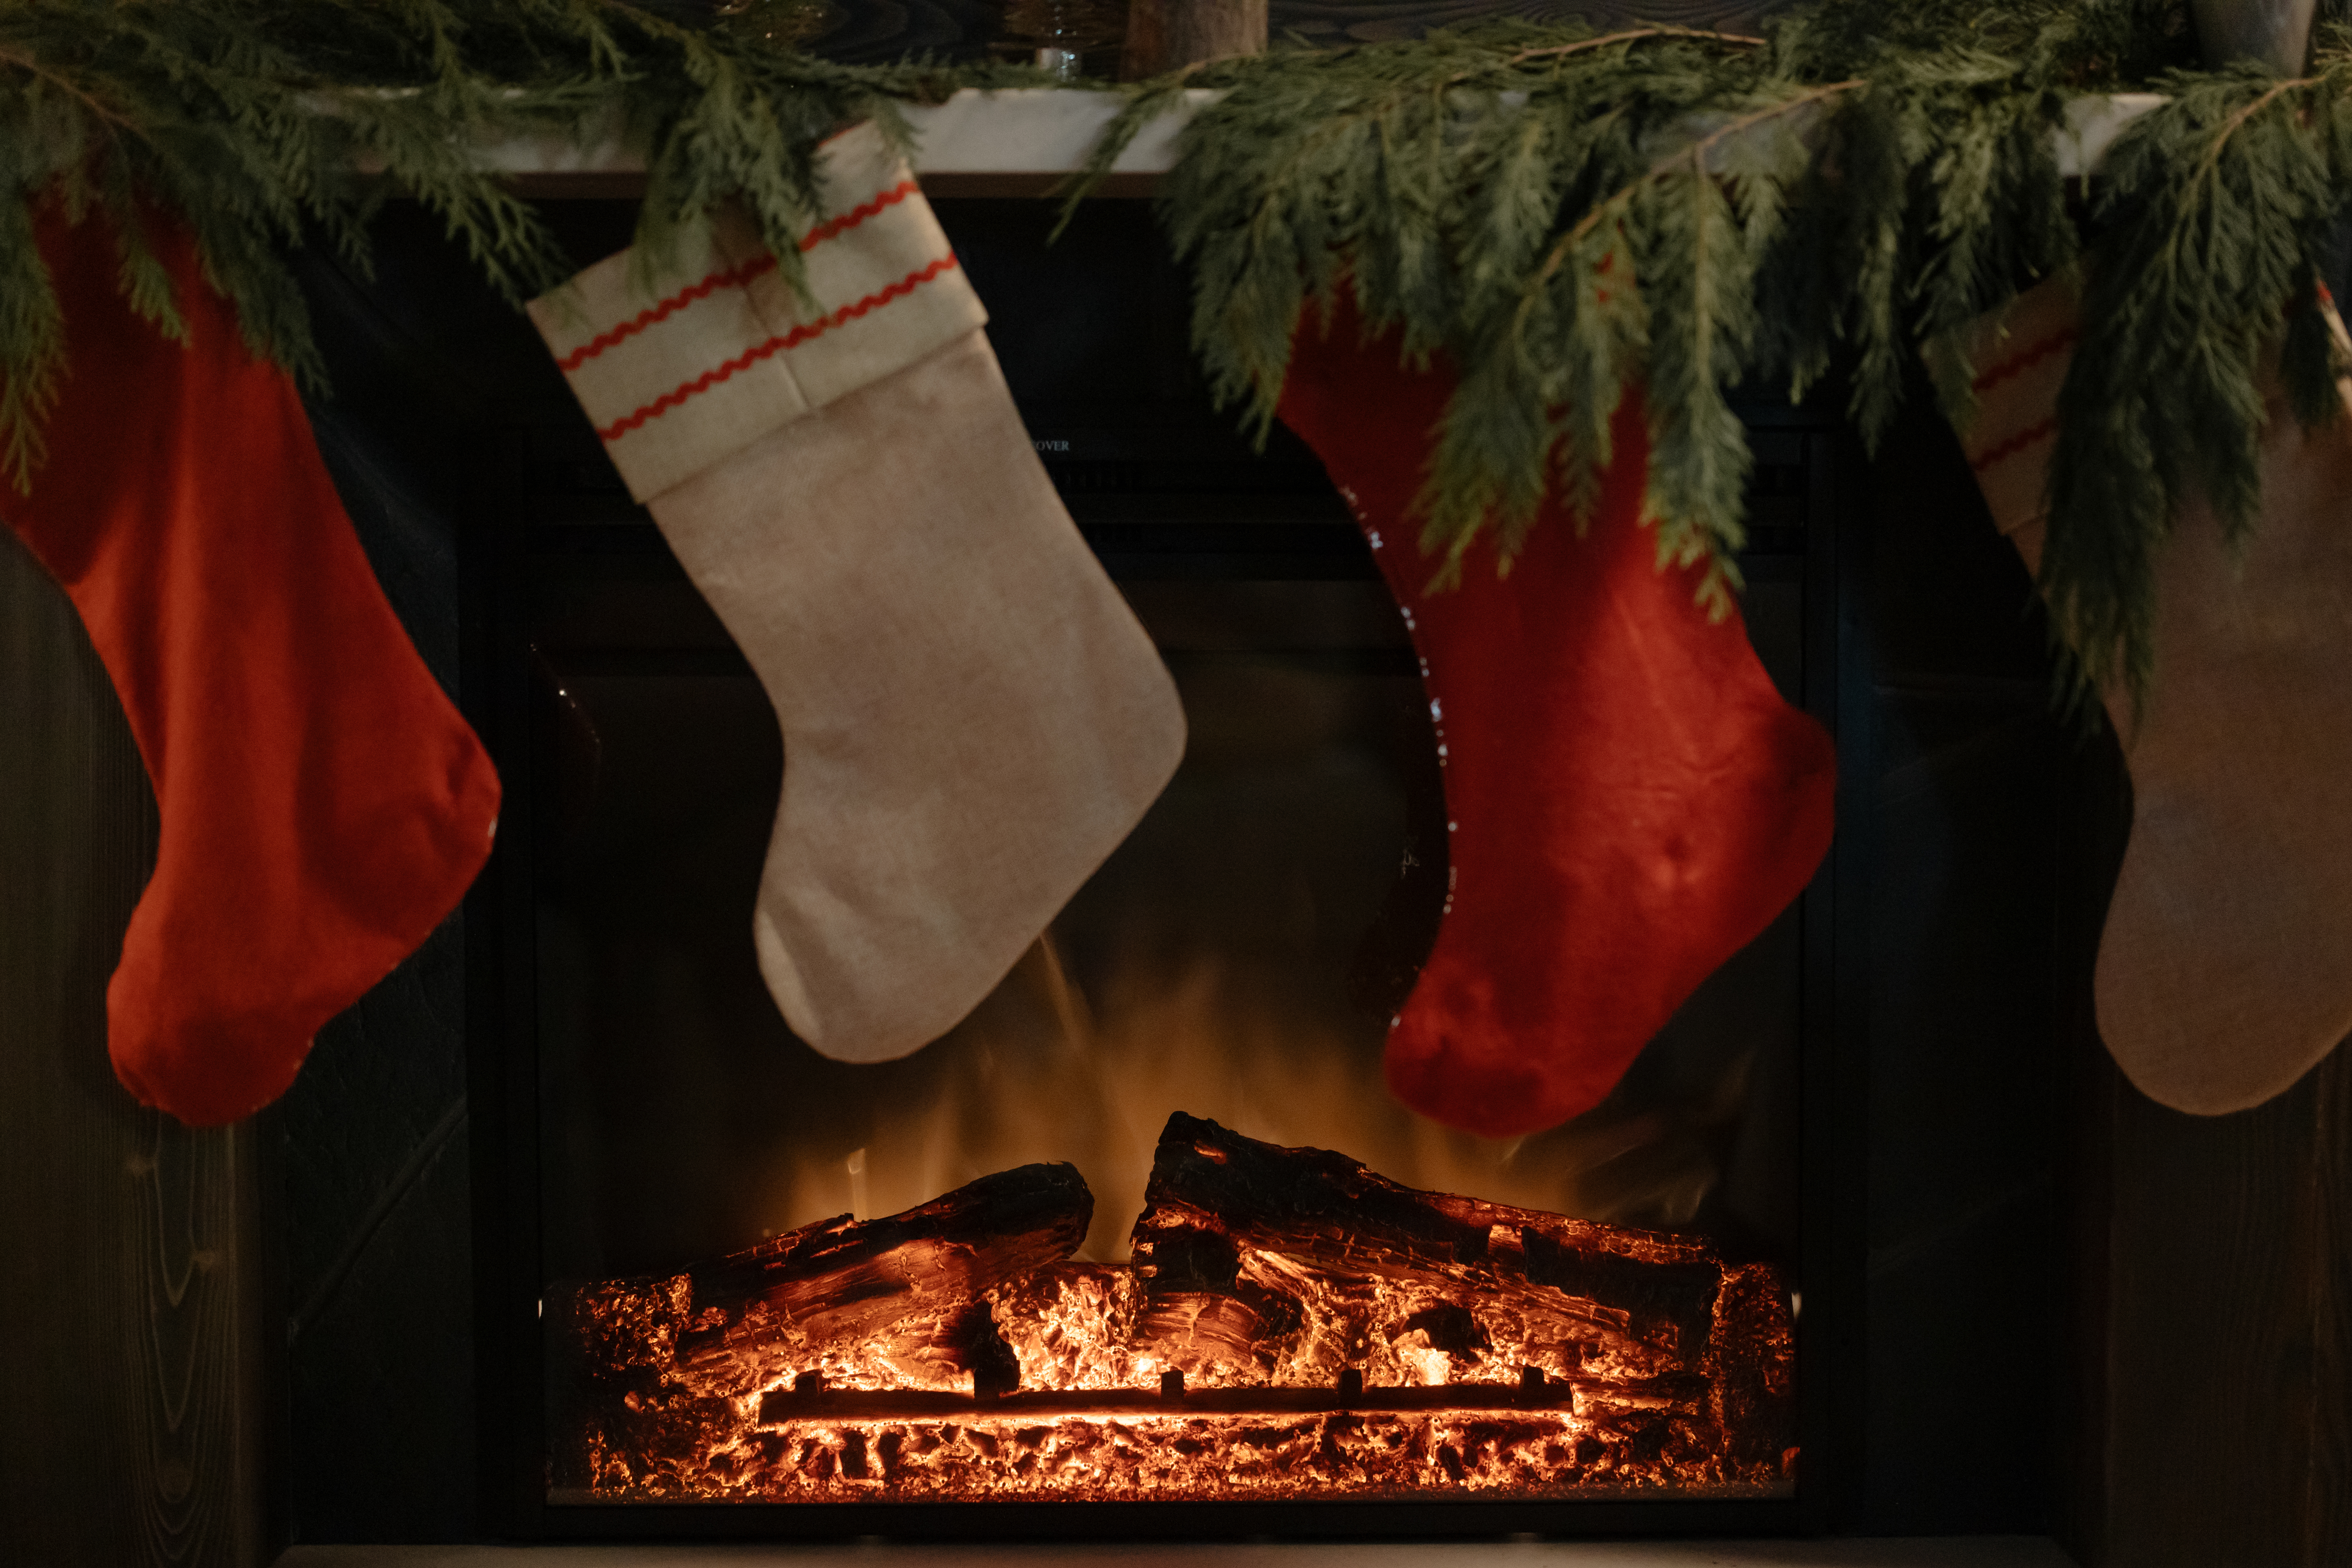 Indoor fireplace with stockings